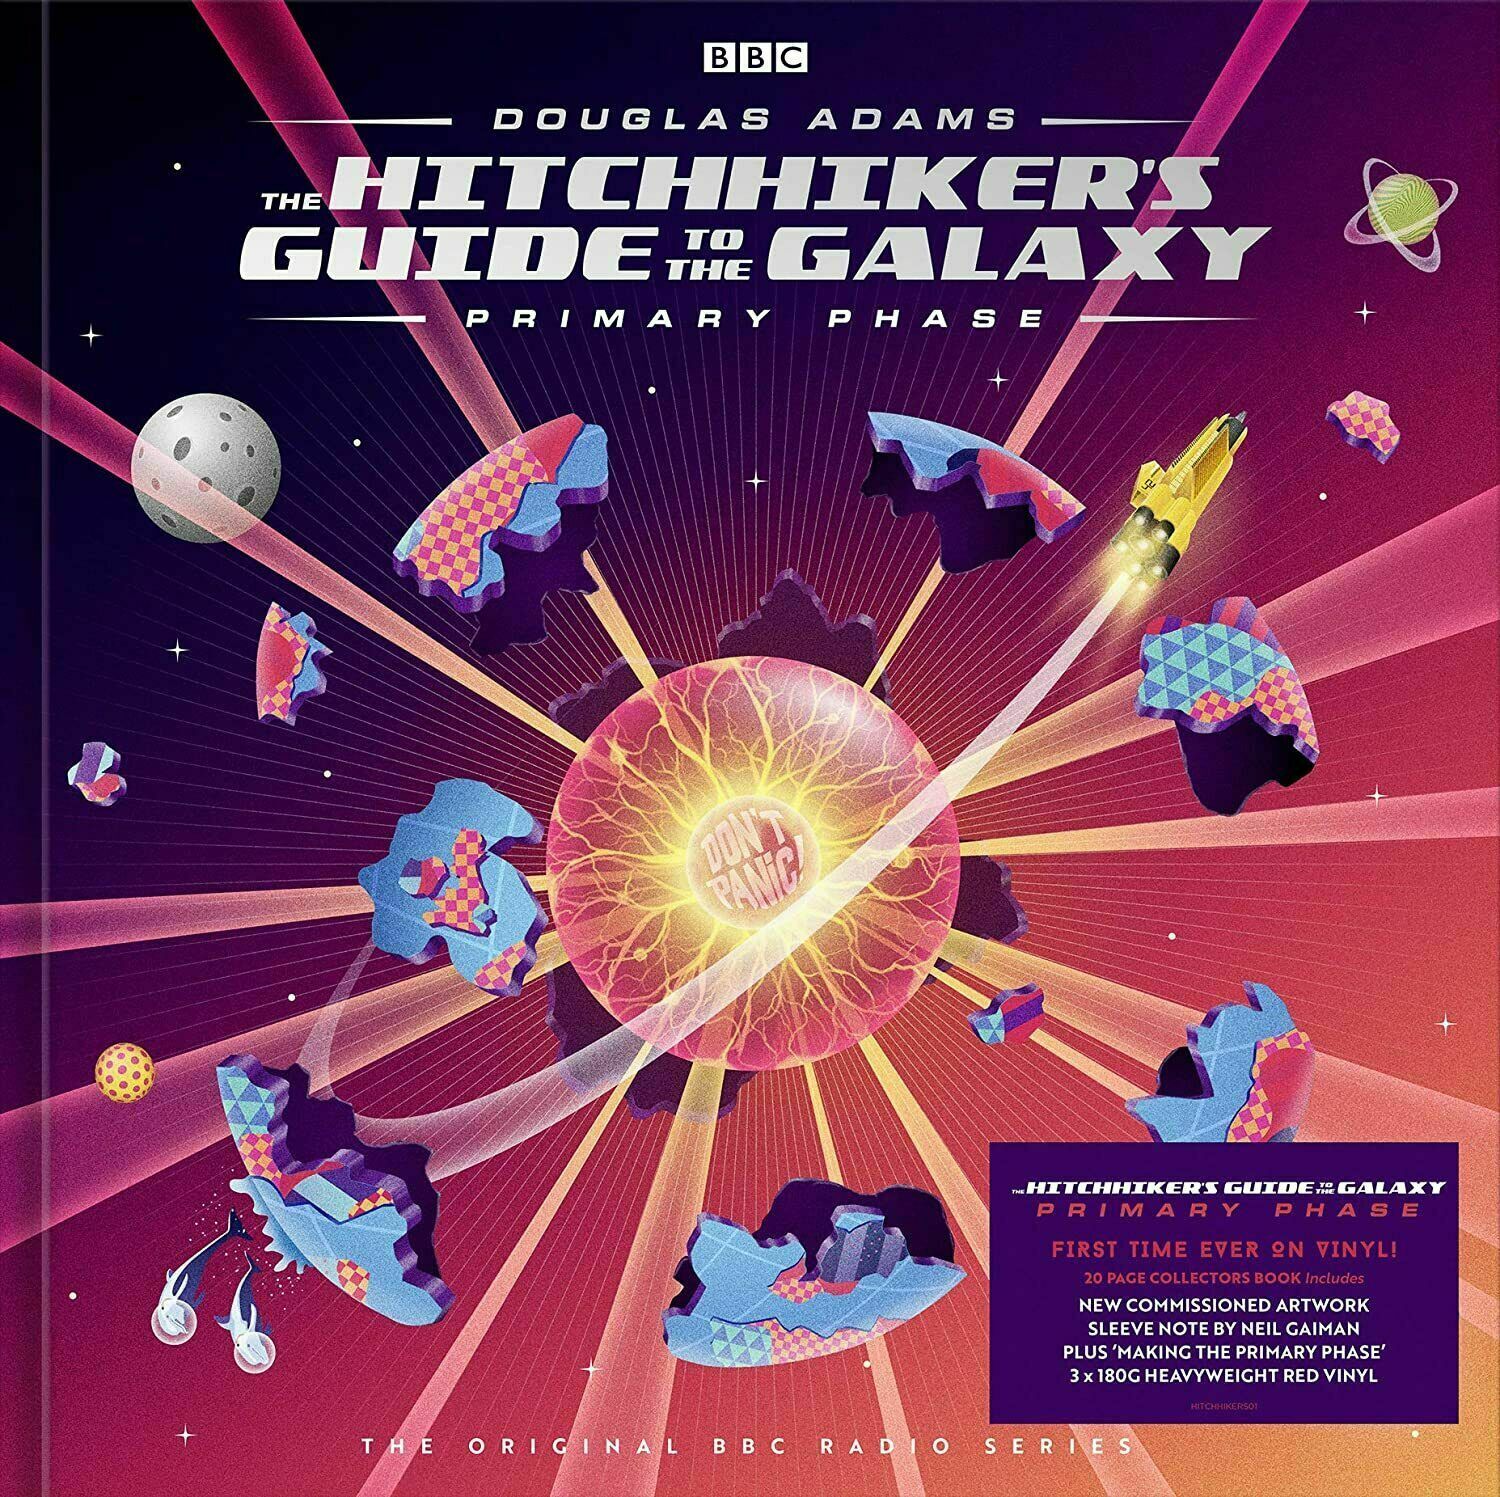 The Hitchhiker's Guide to the Galaxy / Original BBC radio series